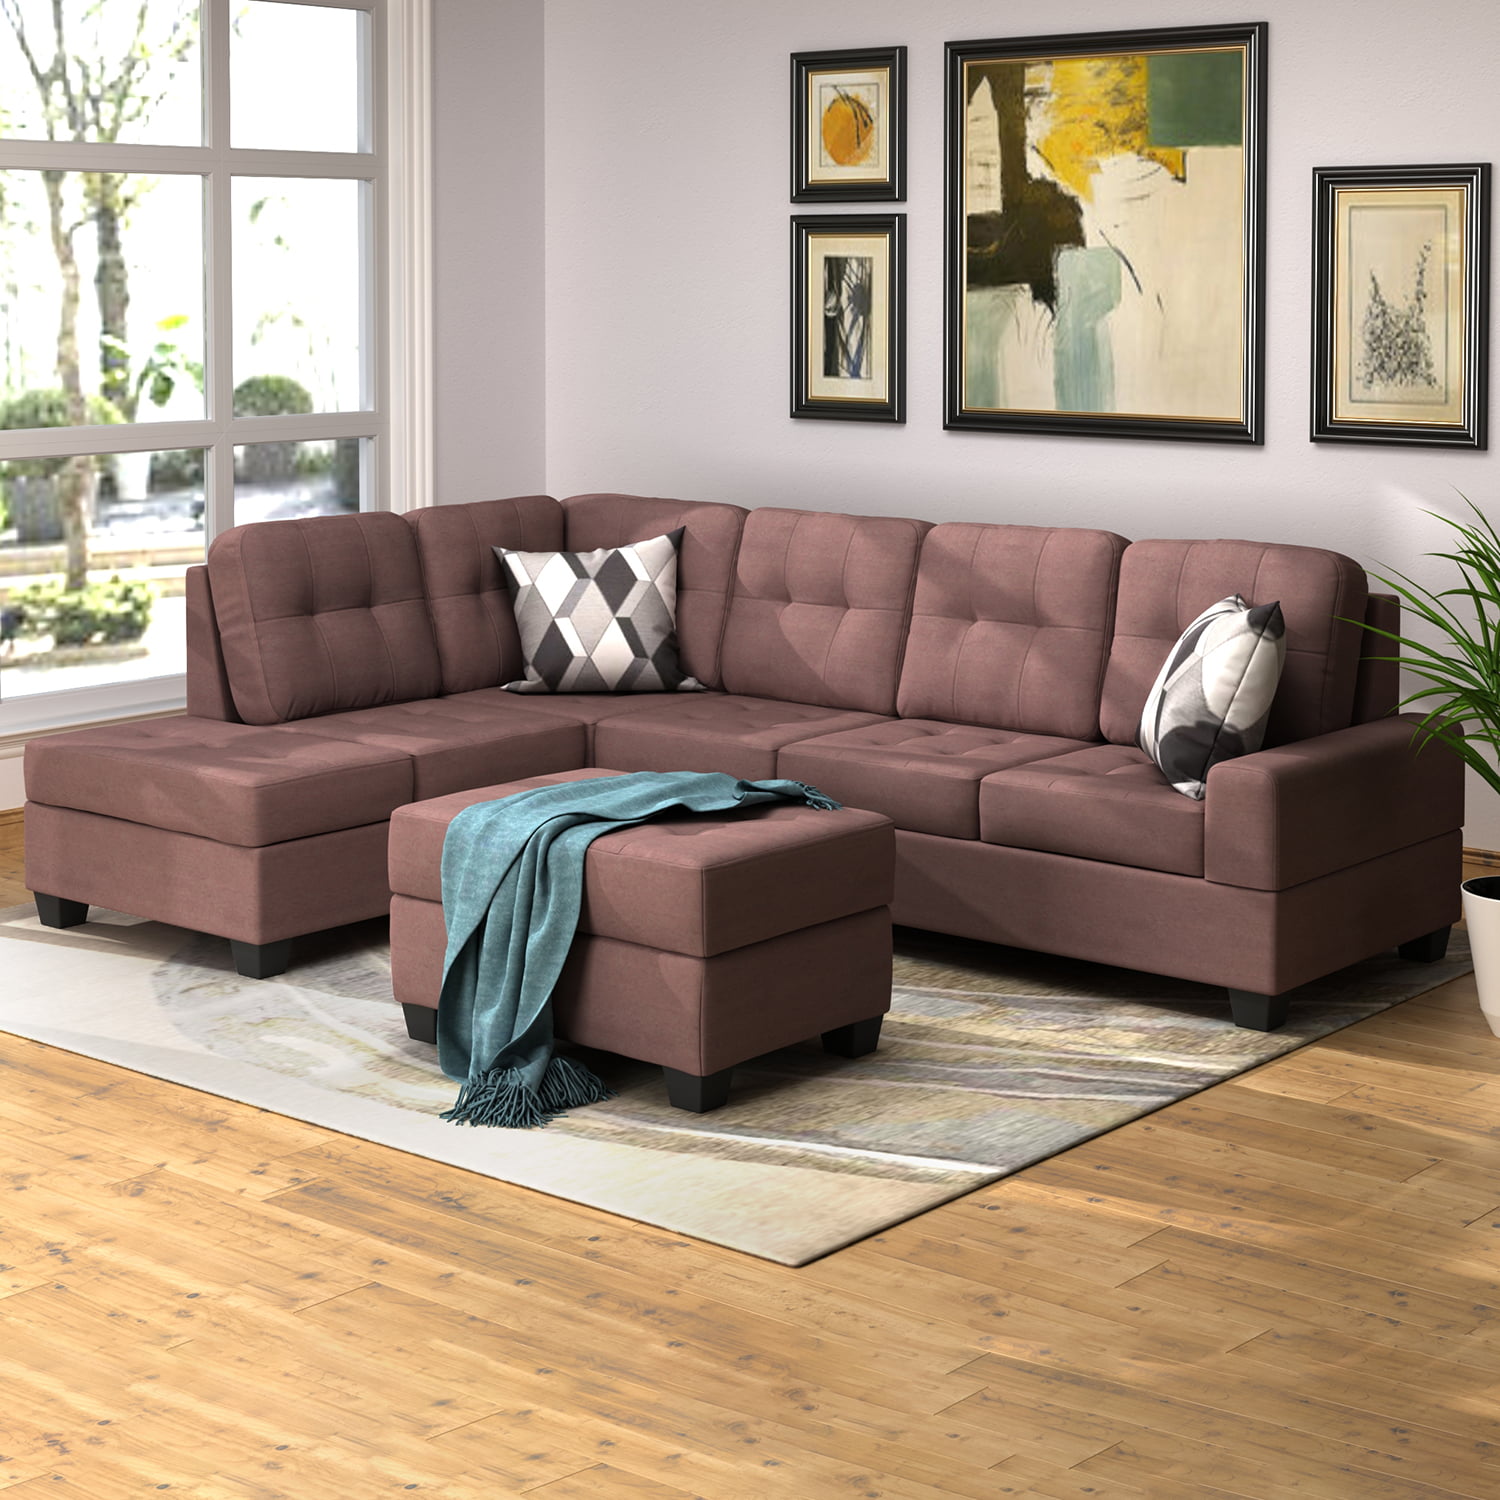 3 Piece Sectional Sofa Microfiber with Reversible Chaise Storage